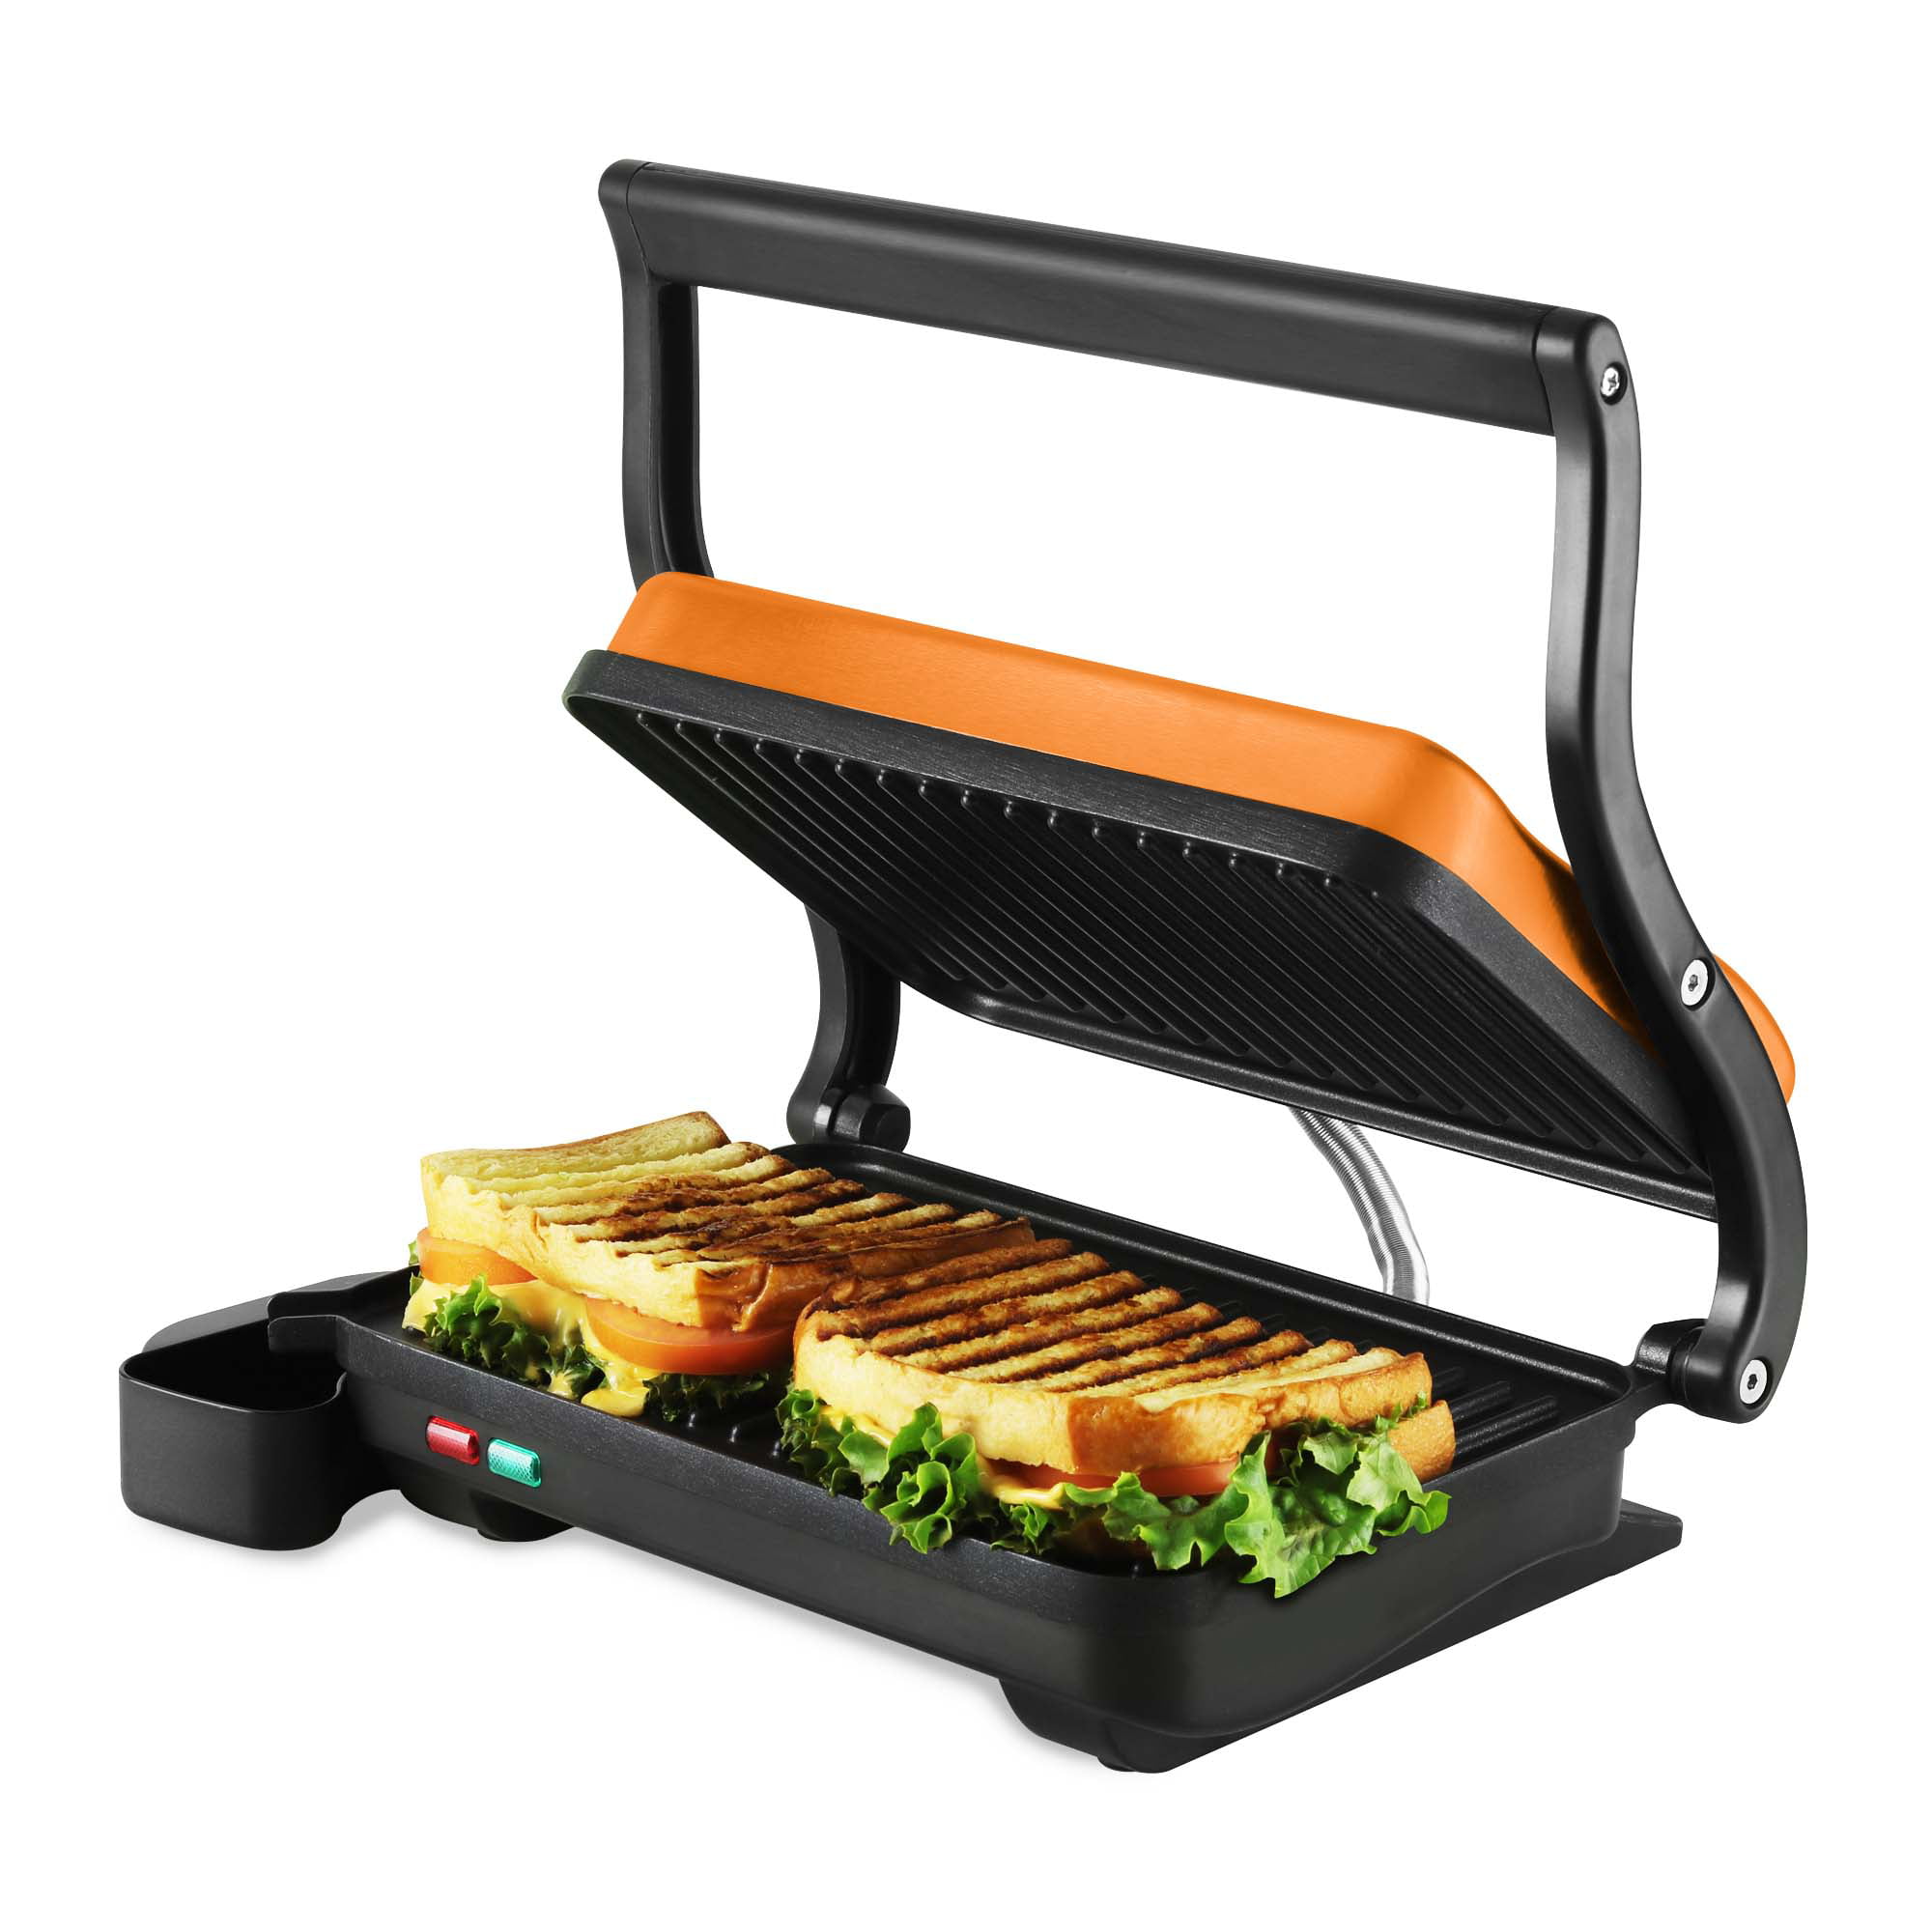 OVENTE Indoor Panini Press Grill with Non-Stick Plates, Opens 180 Degrees, 1000W Thermostat Control and Drip Tray, Perfect Sandwich Maker for Brushed GP0620CO - Walmart.com